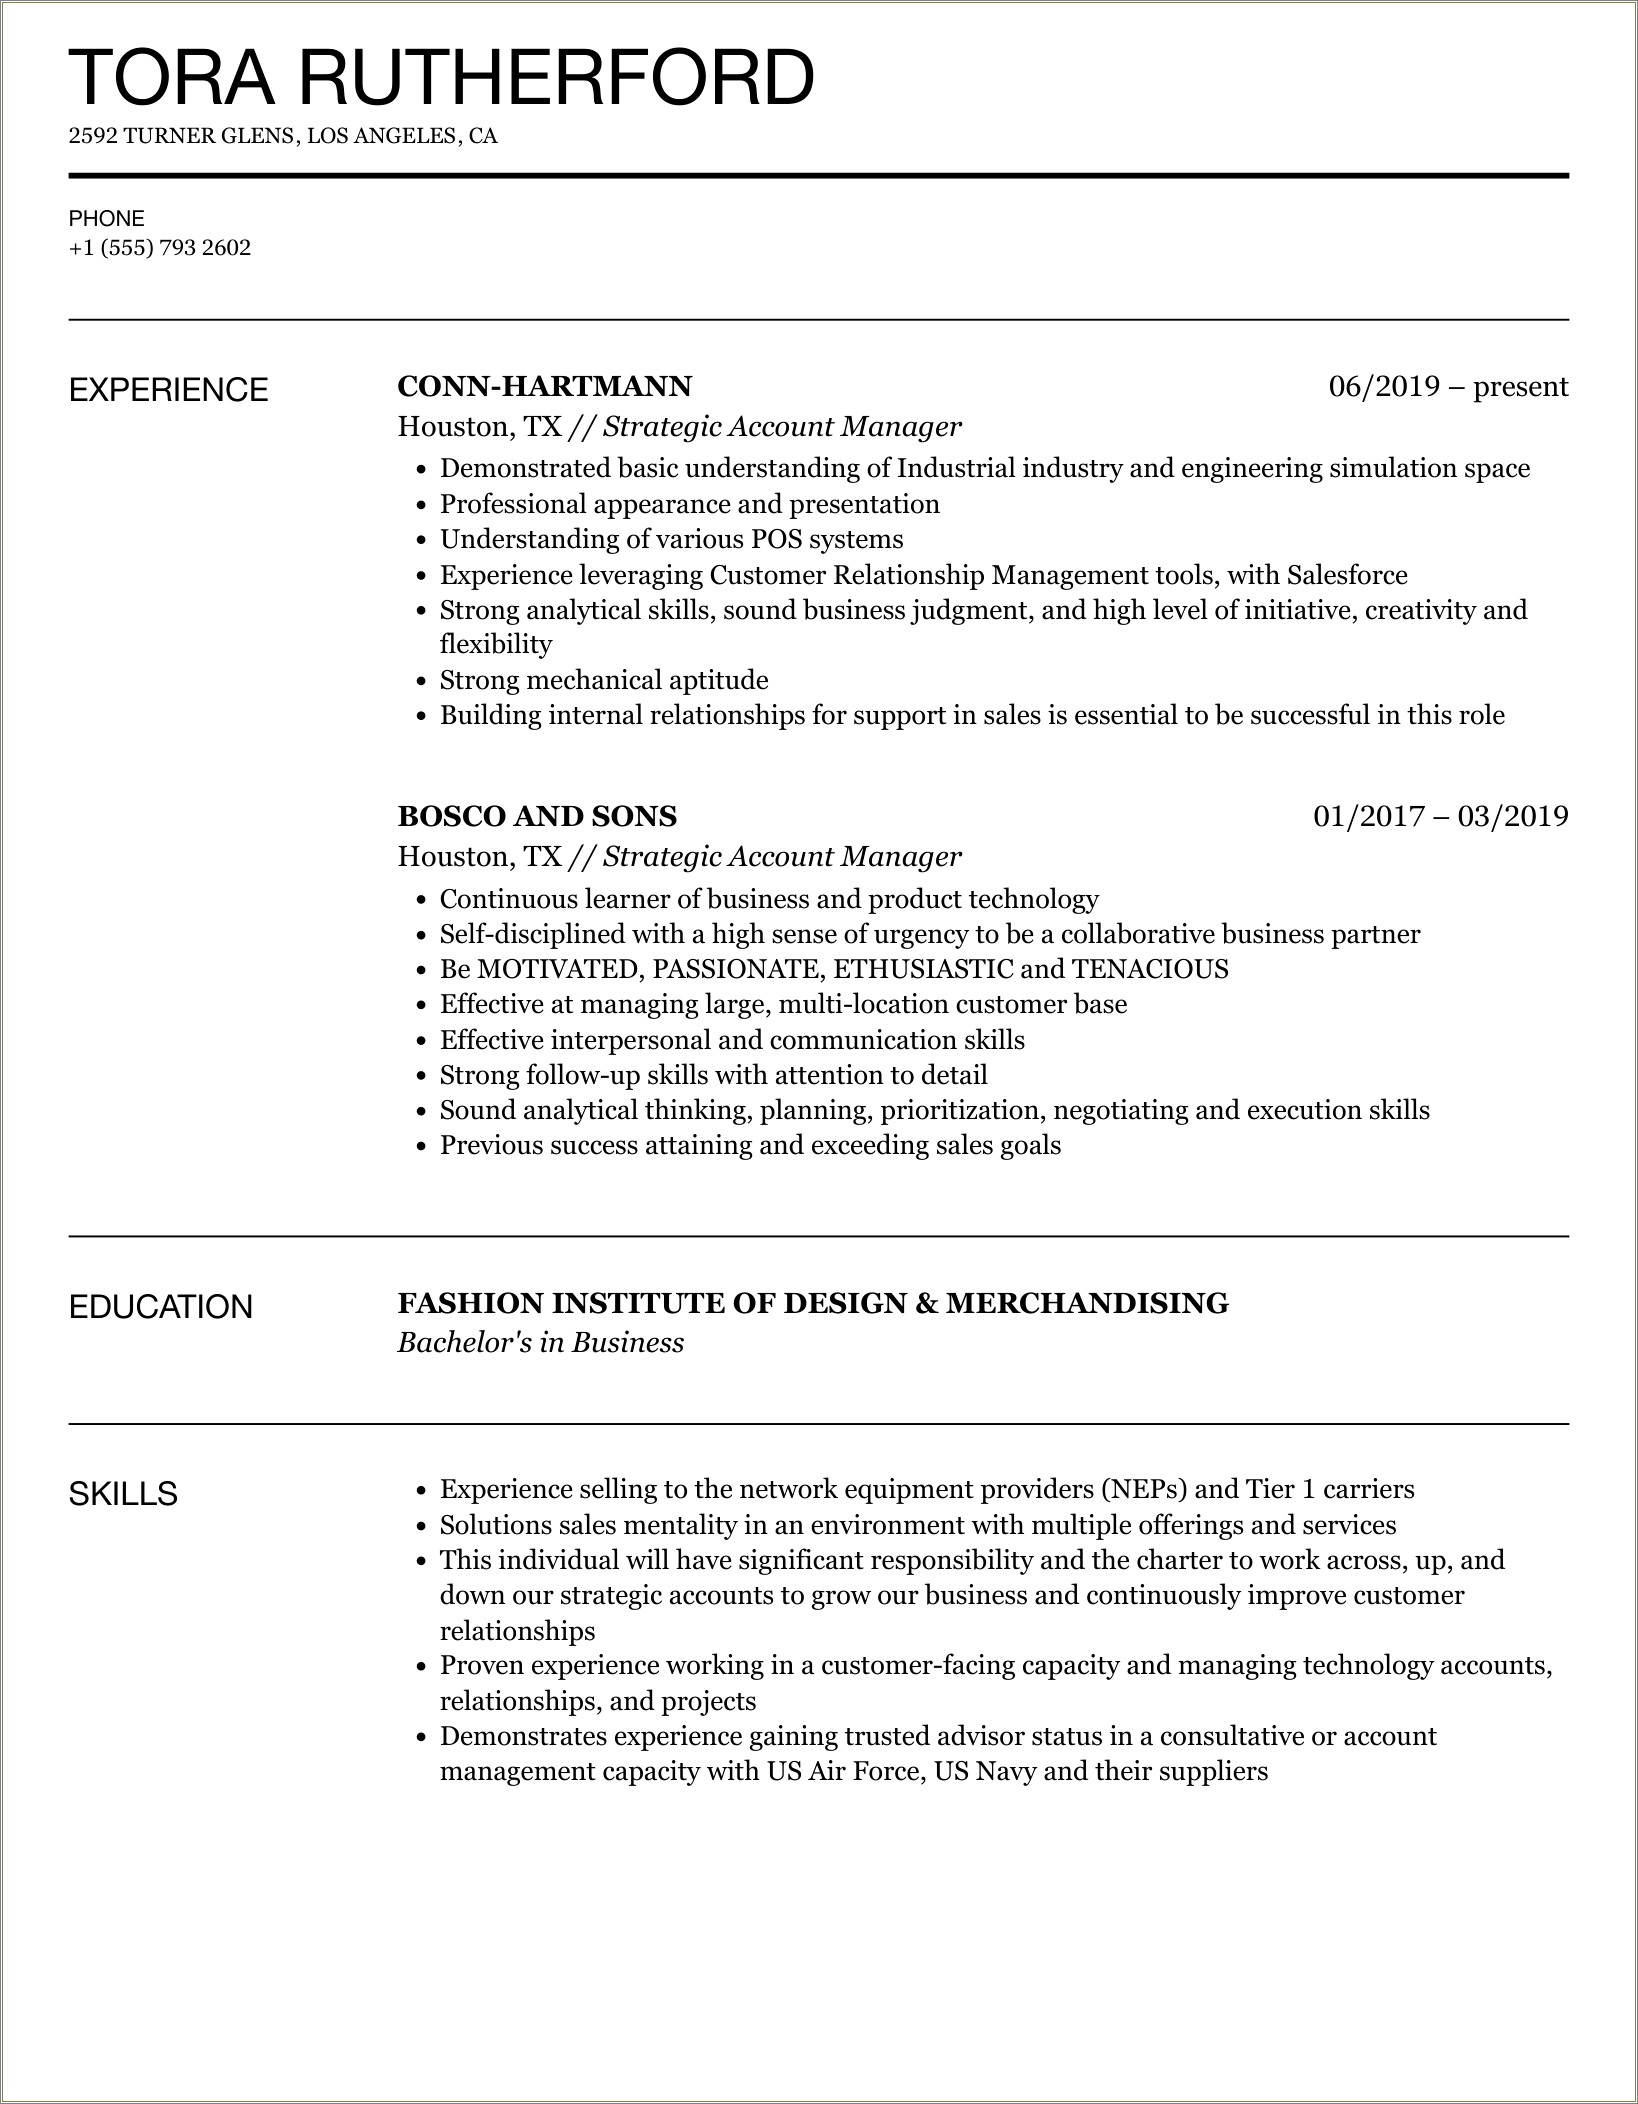 Resume Objective For Orthopedic Manager To Fashion Industry